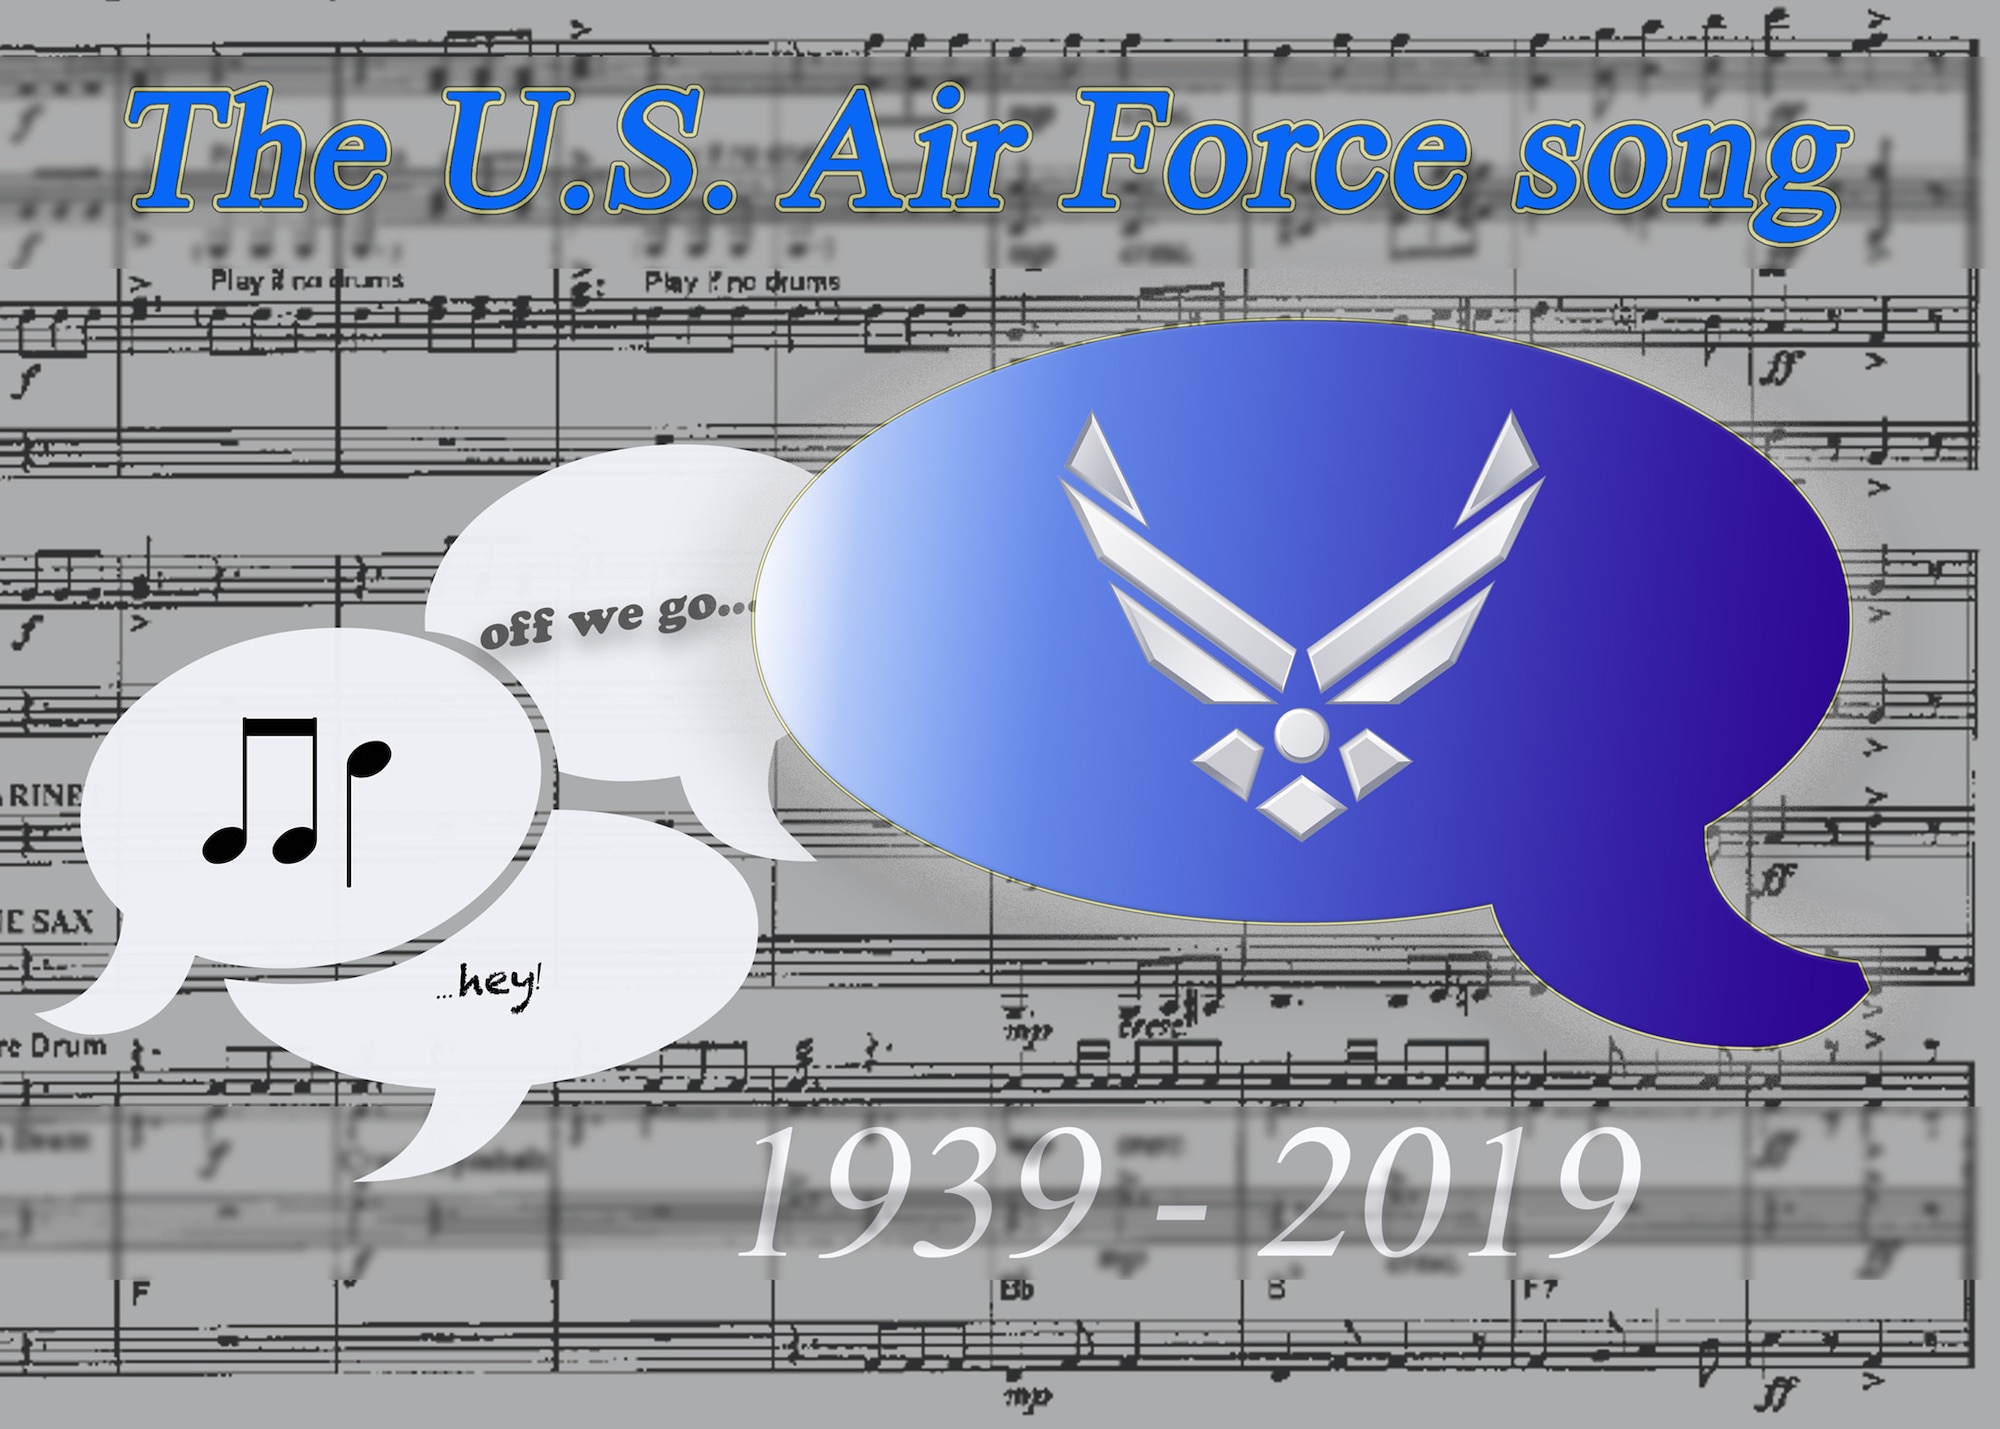 The U.S. Air Force song